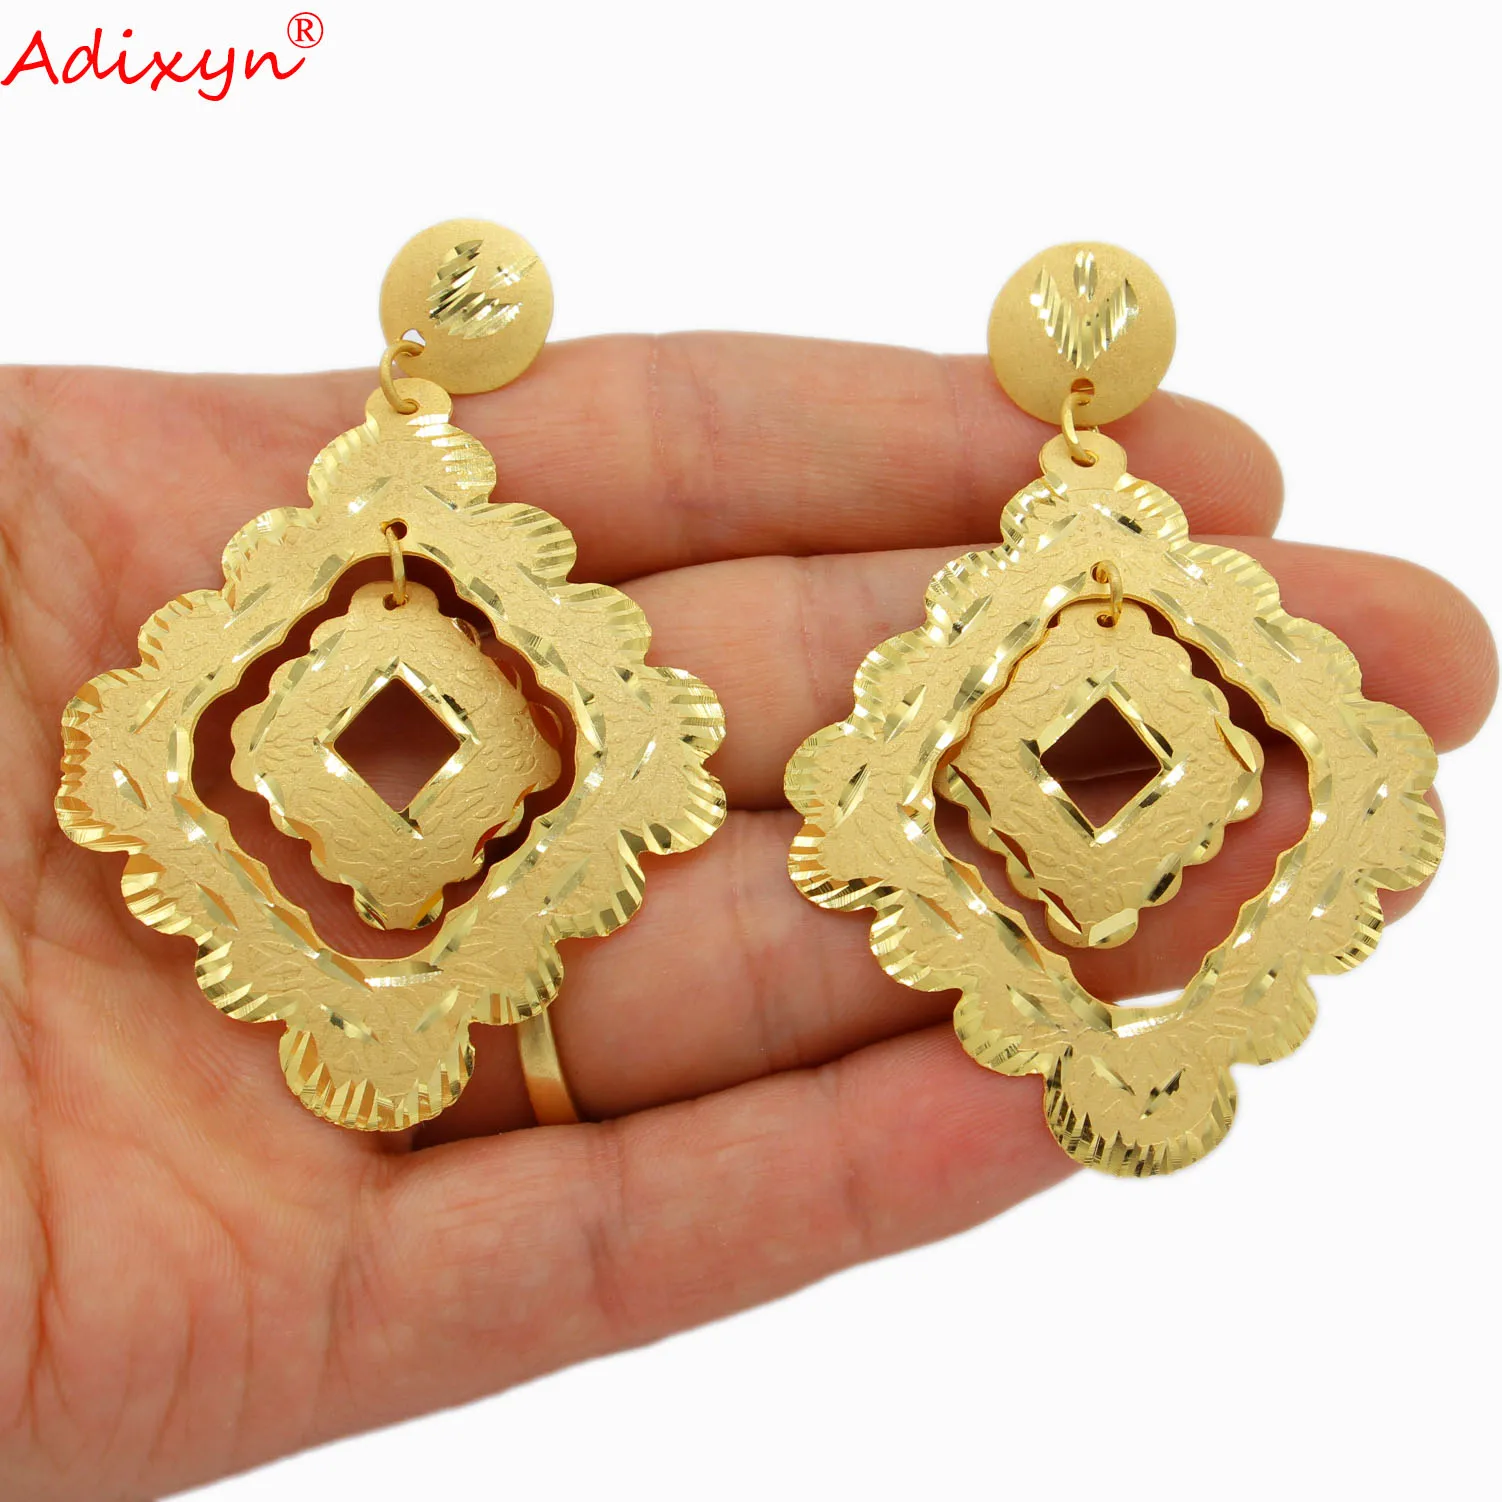 

Adixyn 3 Desigh NEW Light Weight Dubai Earrings for Women Girls 24K Gold Color Ethnic Earring African Jewelry Party Gifts N04068